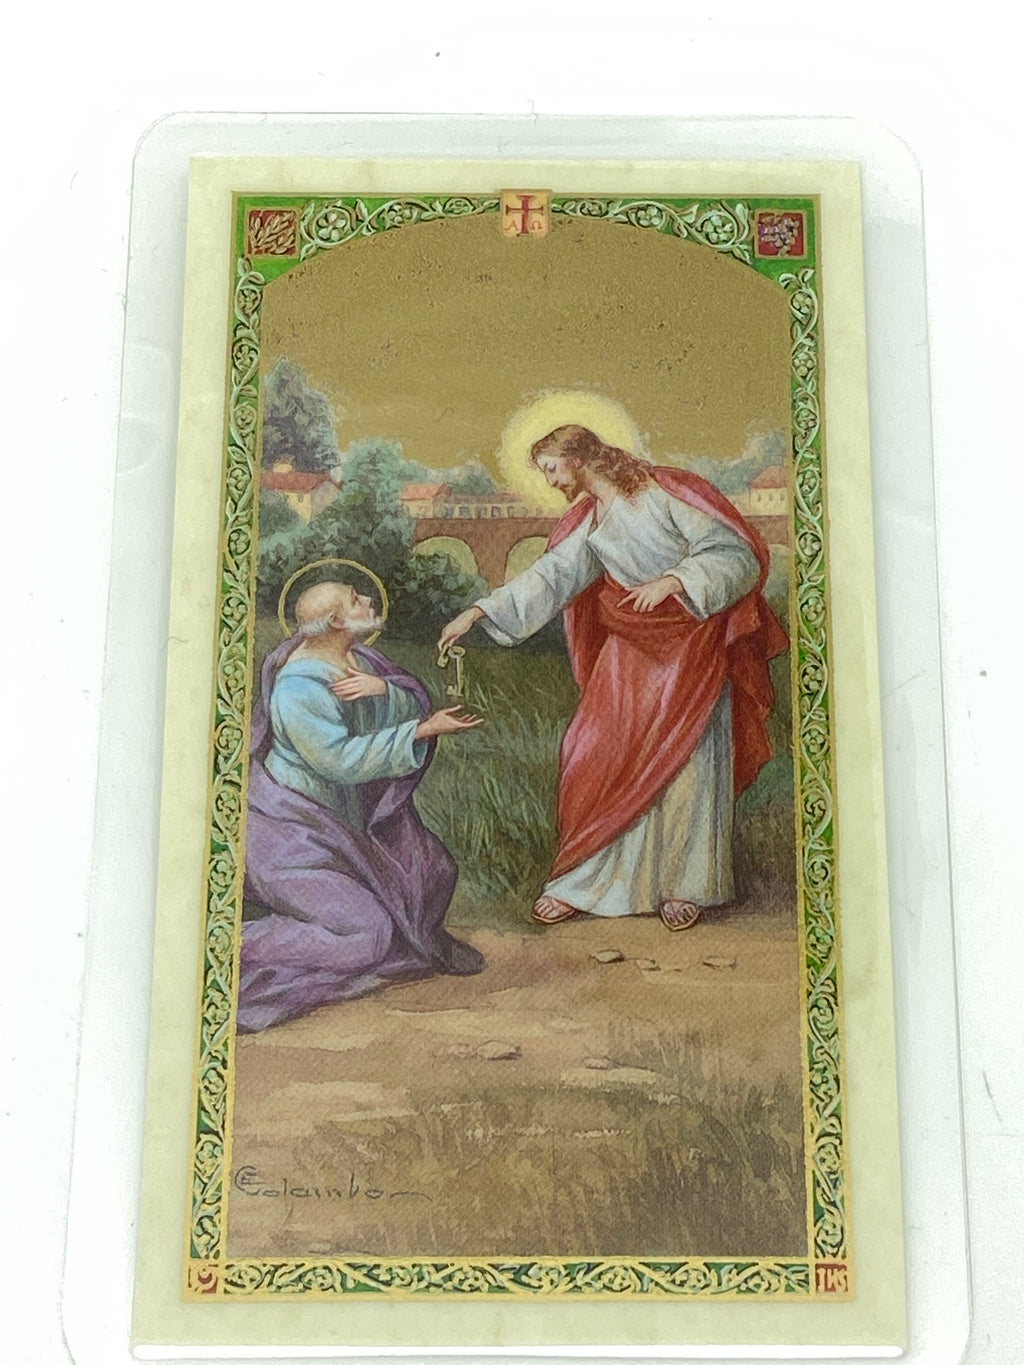 St. Peter the Apostle Laminated Holy Card - Unique Catholic Gifts